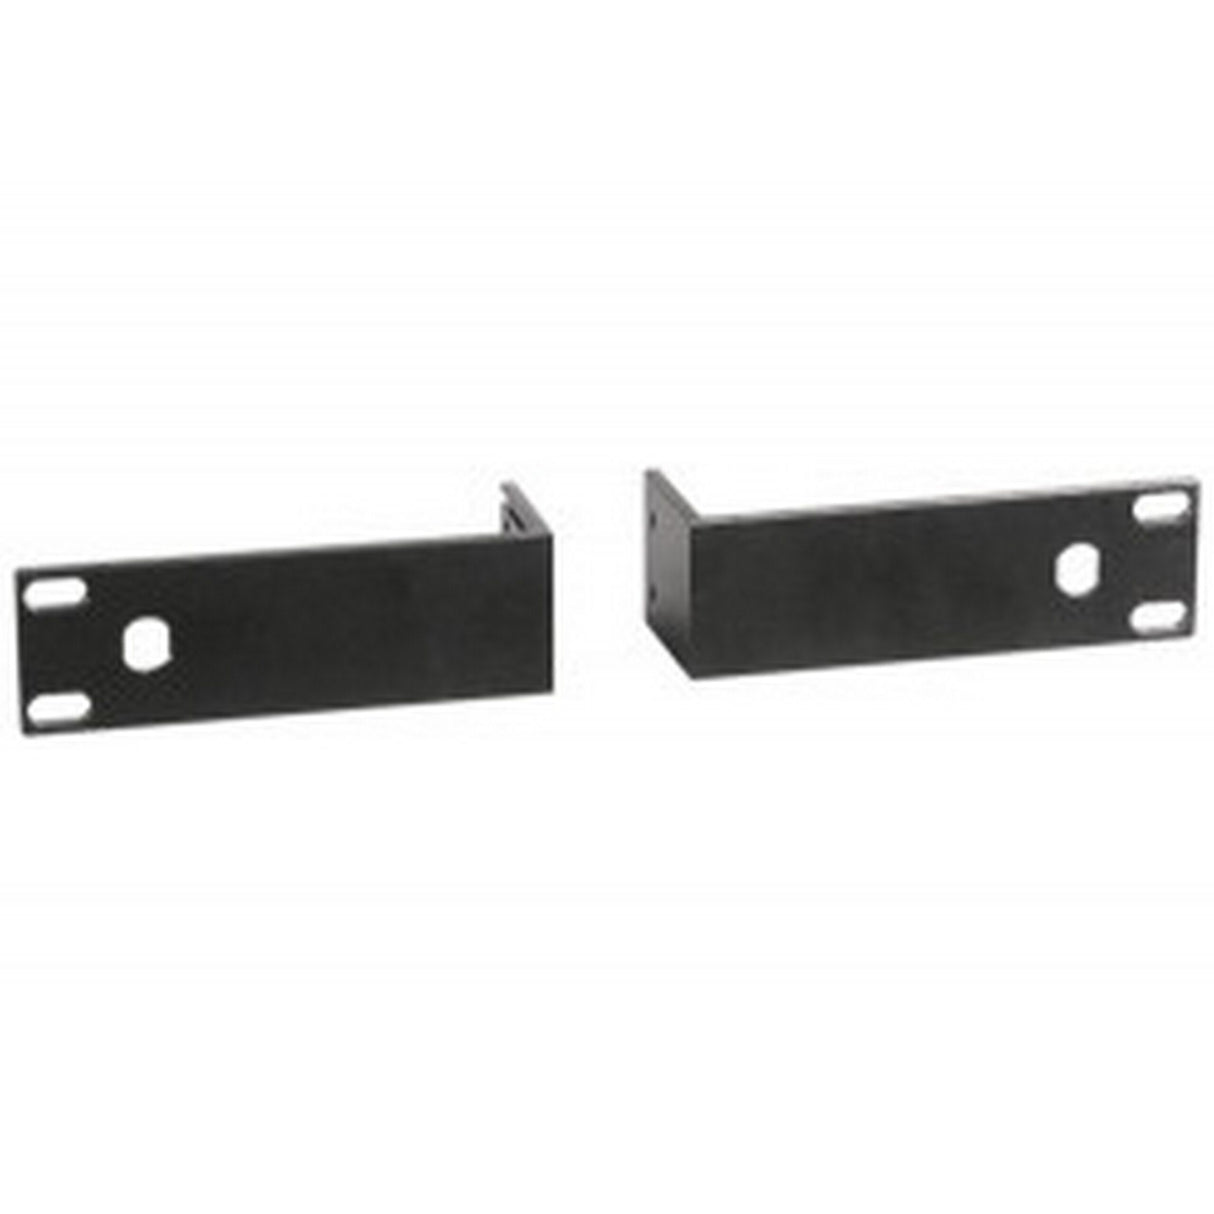 MIPRO FB-71 Rack Mount Brackets for ACT-311, ACT-312, ACT-717a, ACT-818, MI-808T and ACT-707S